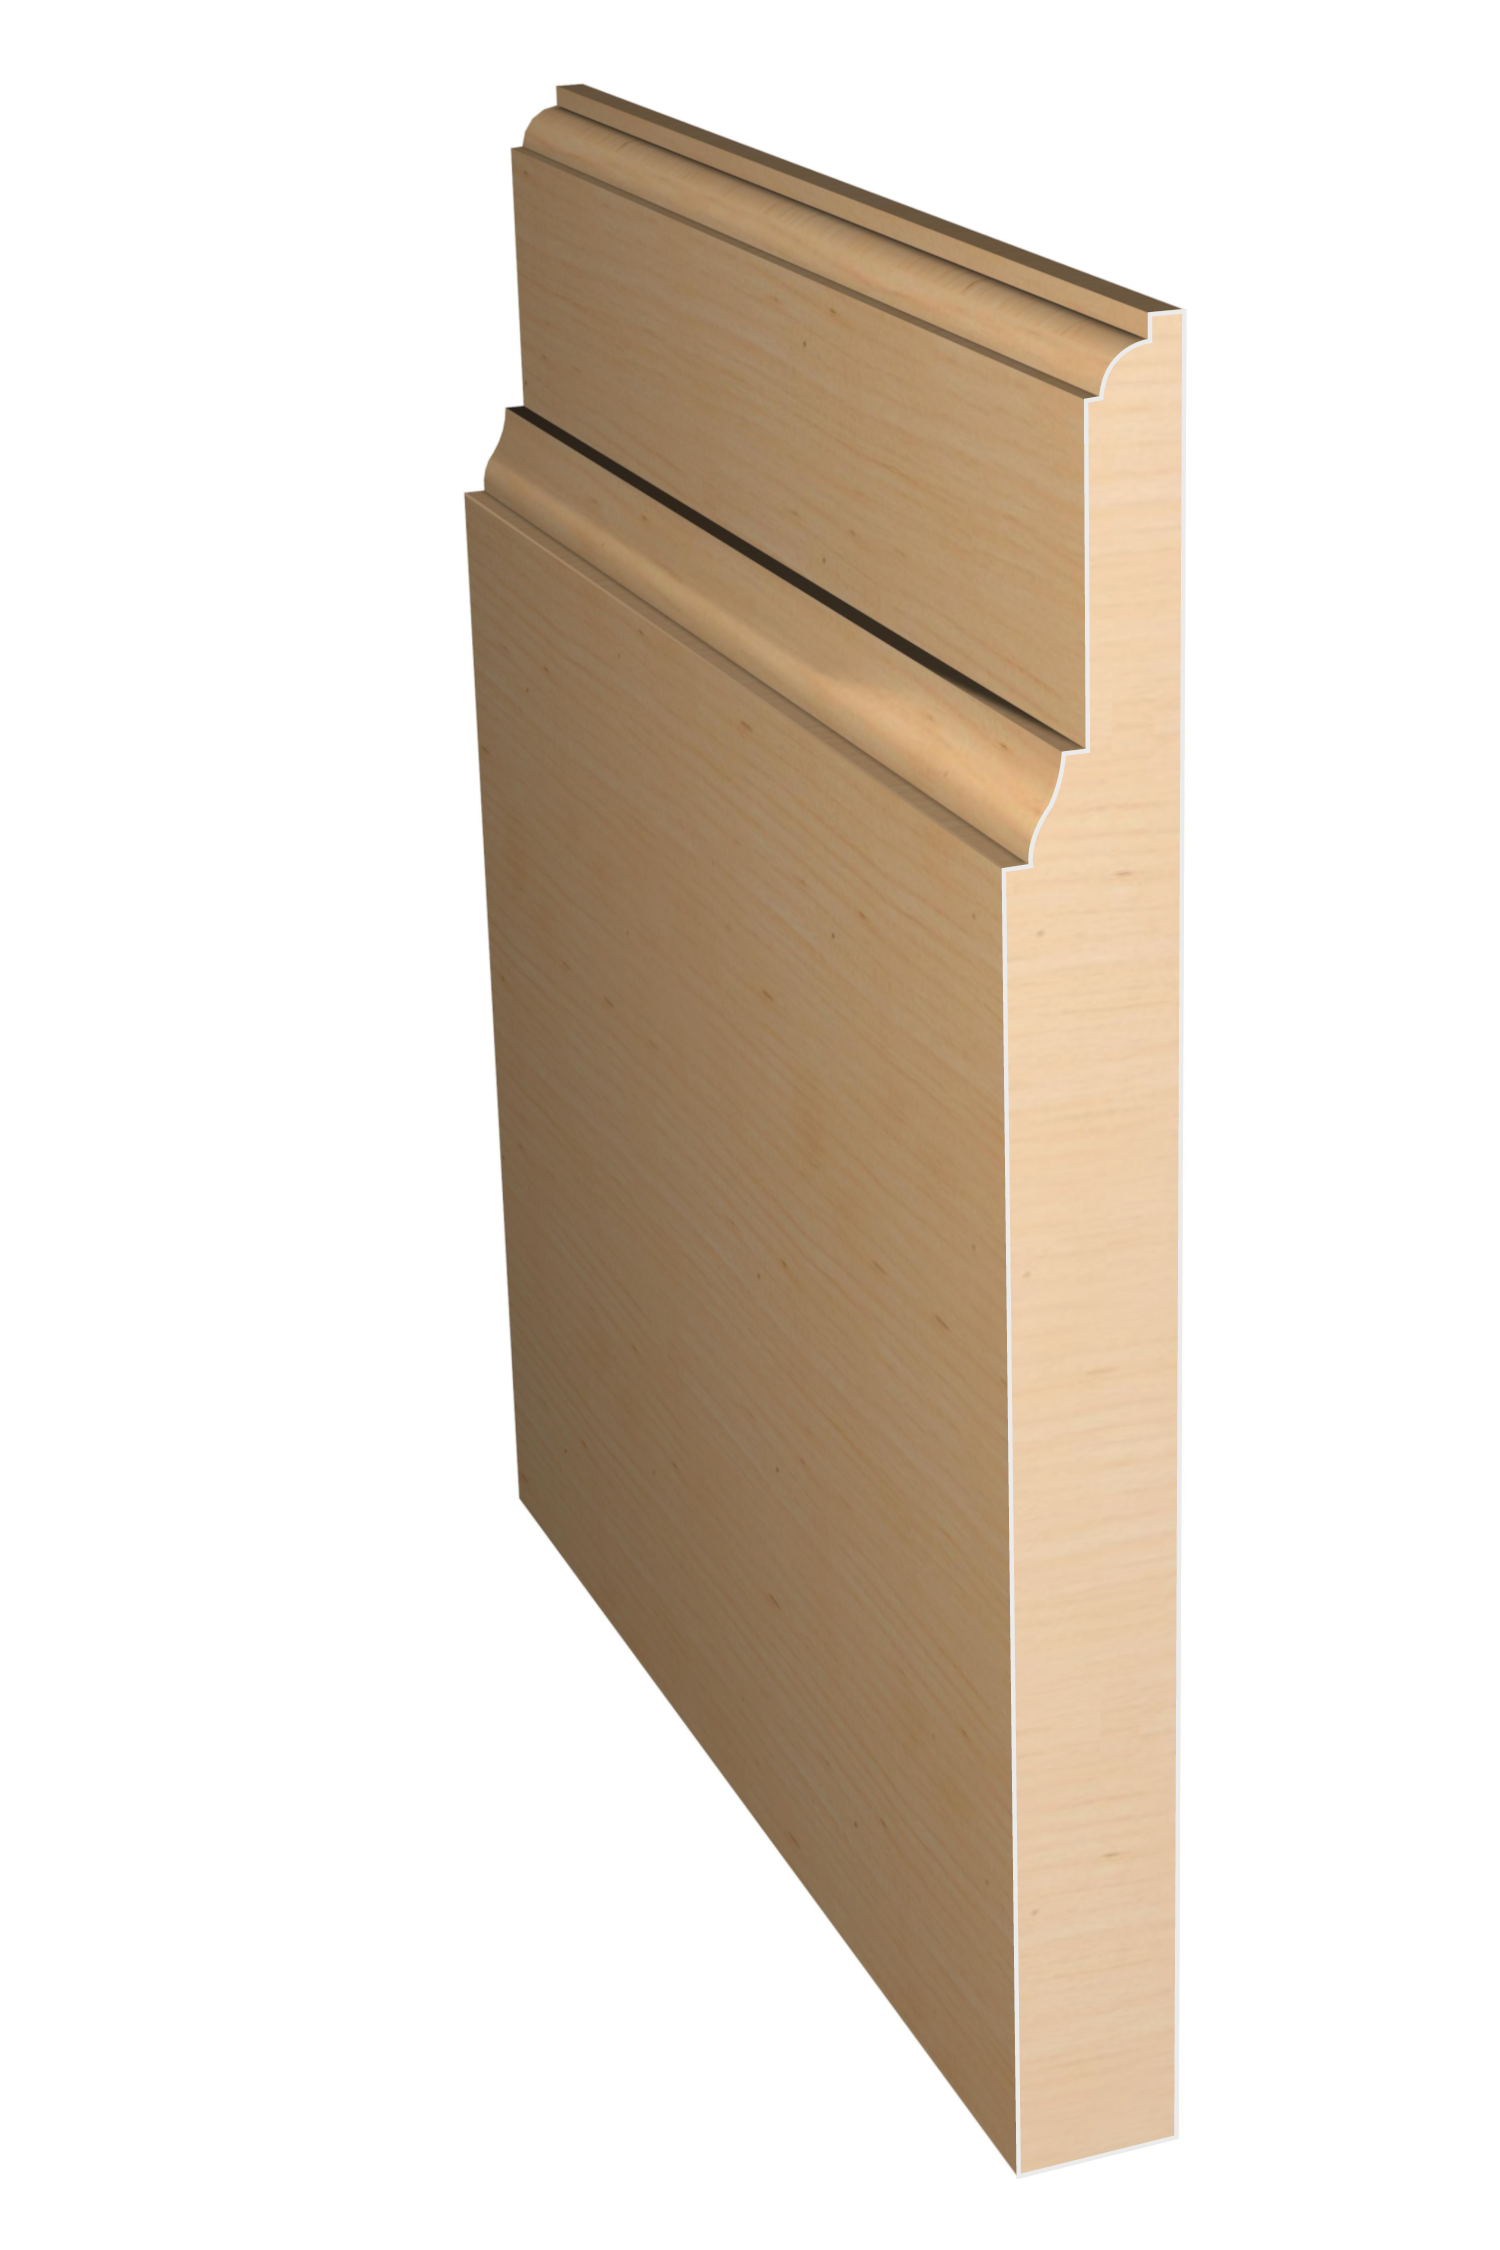 Three dimensional rendering of custom base wood molding BAPL71419 made by Public Lumber Company in Detroit.